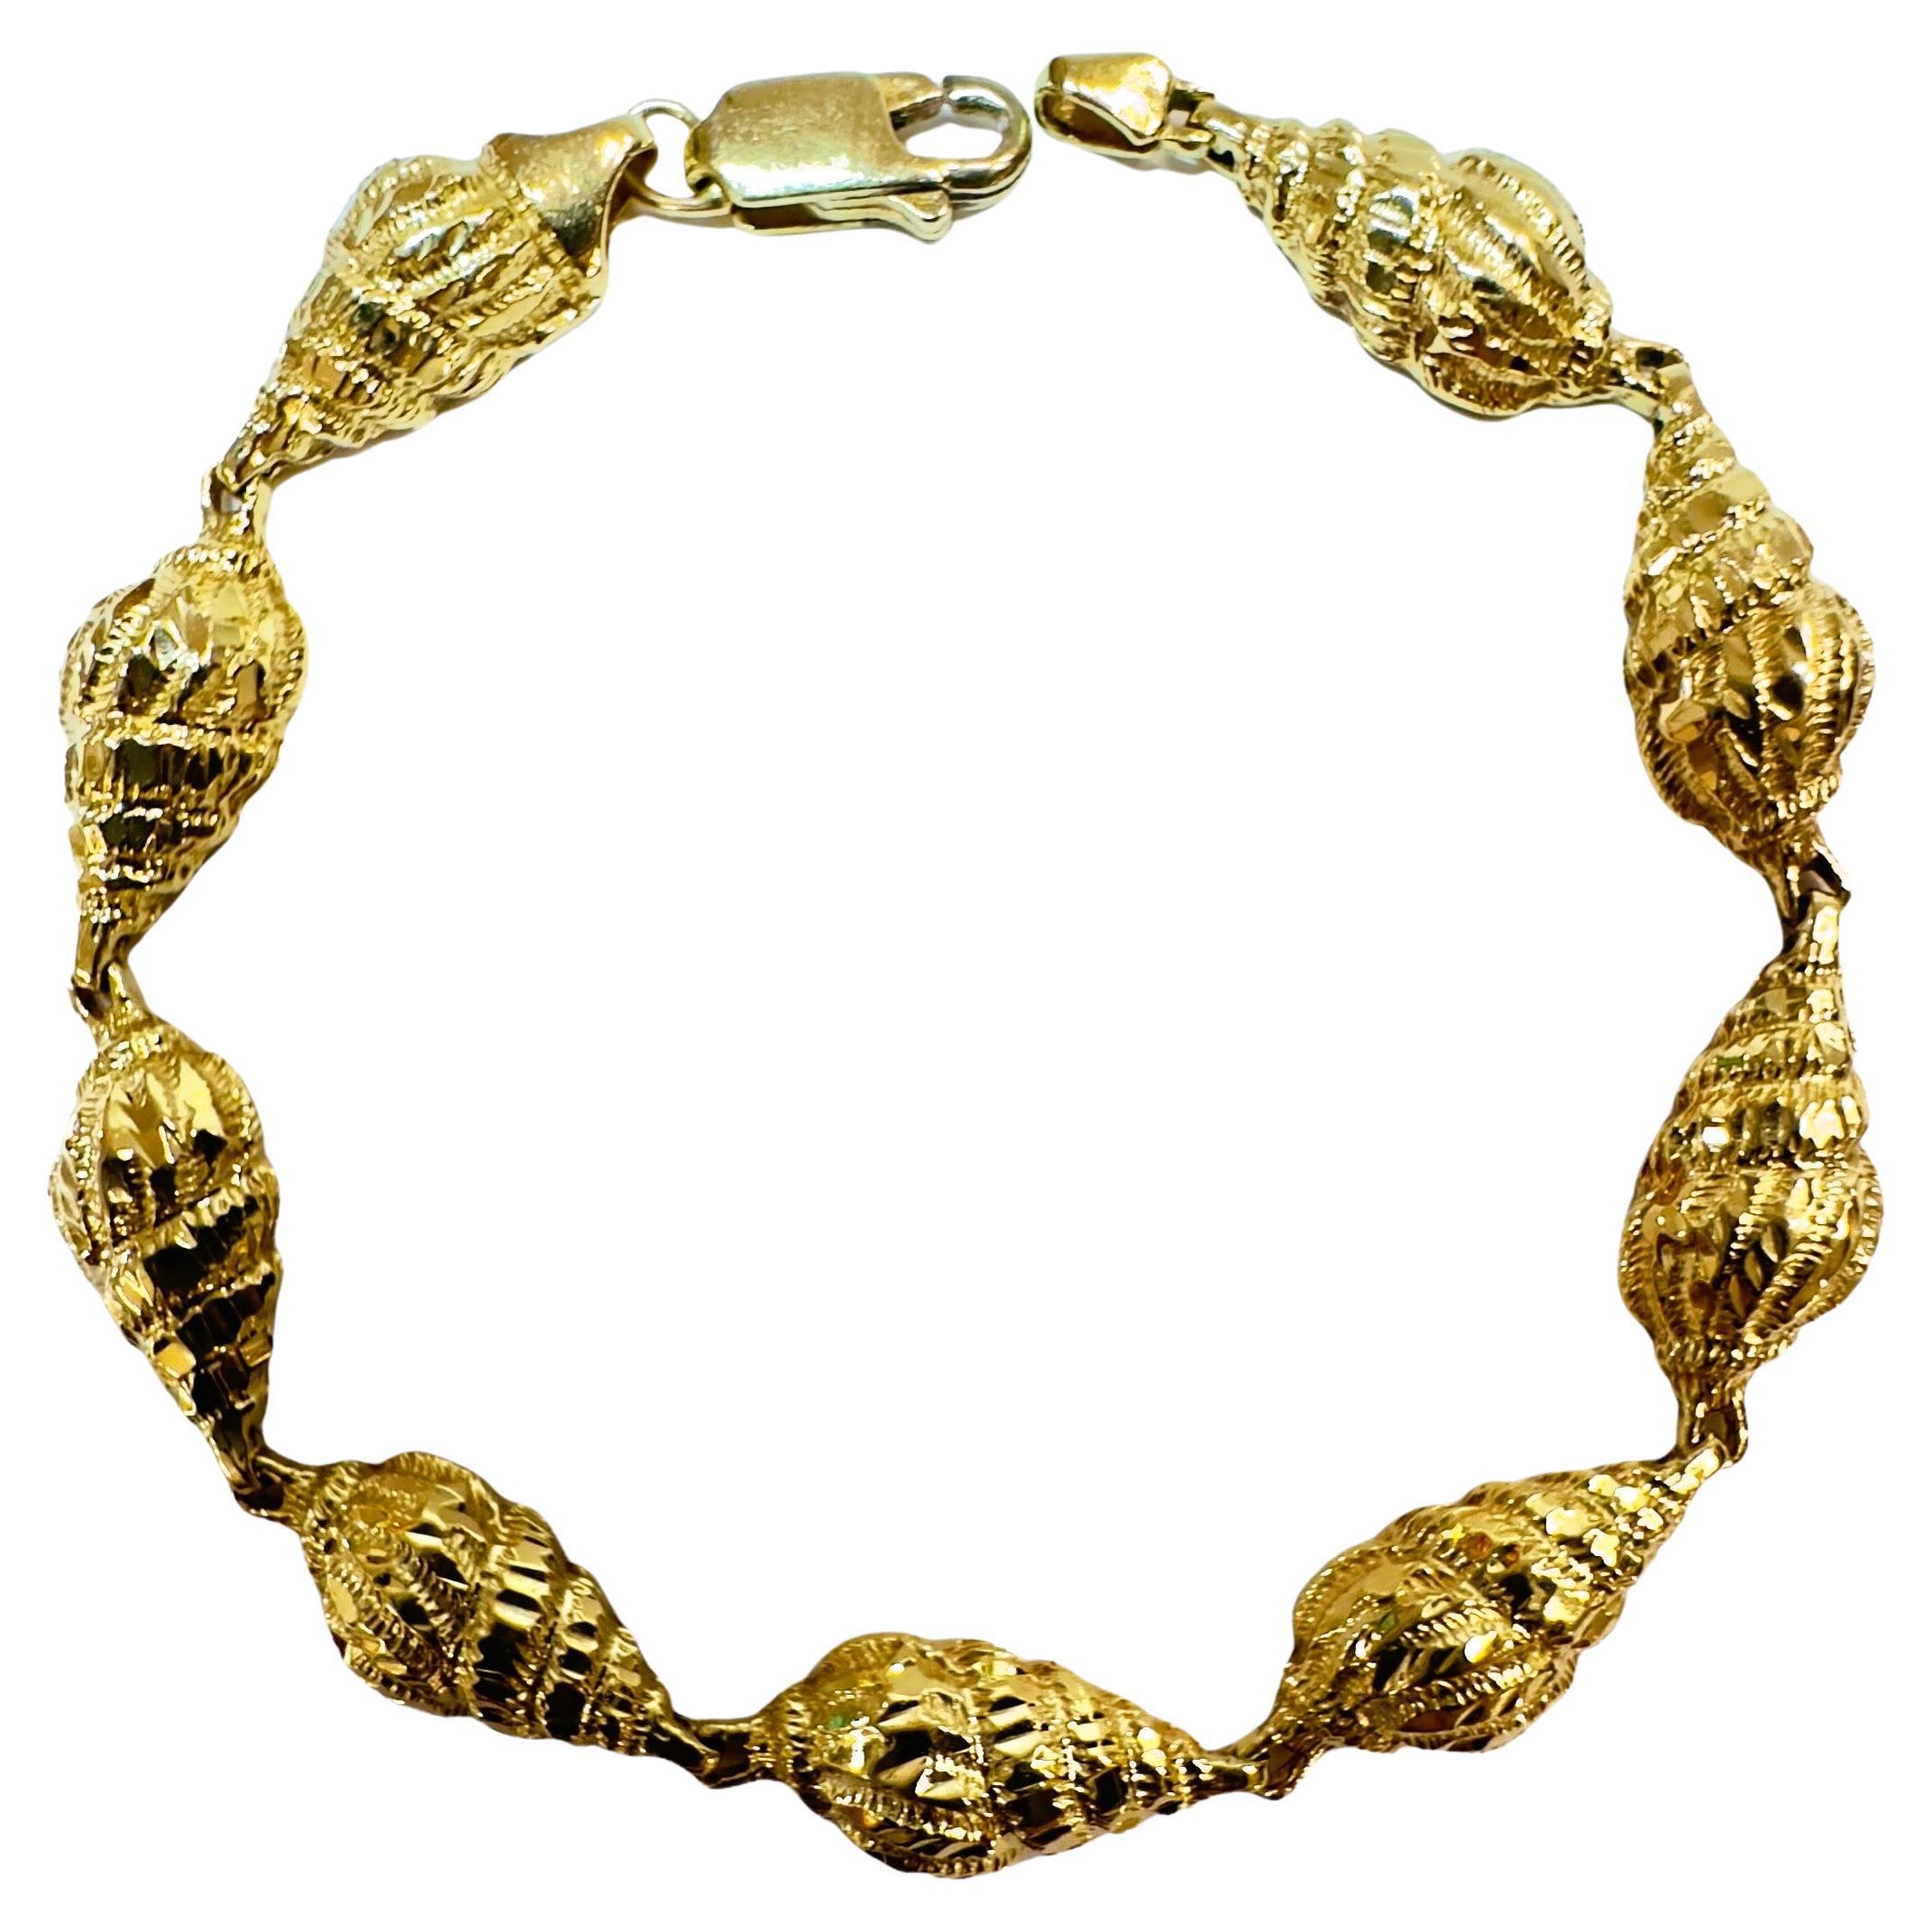 14k Yellow Gold Sea Shell  Bracelet - 7 inches - Stamped